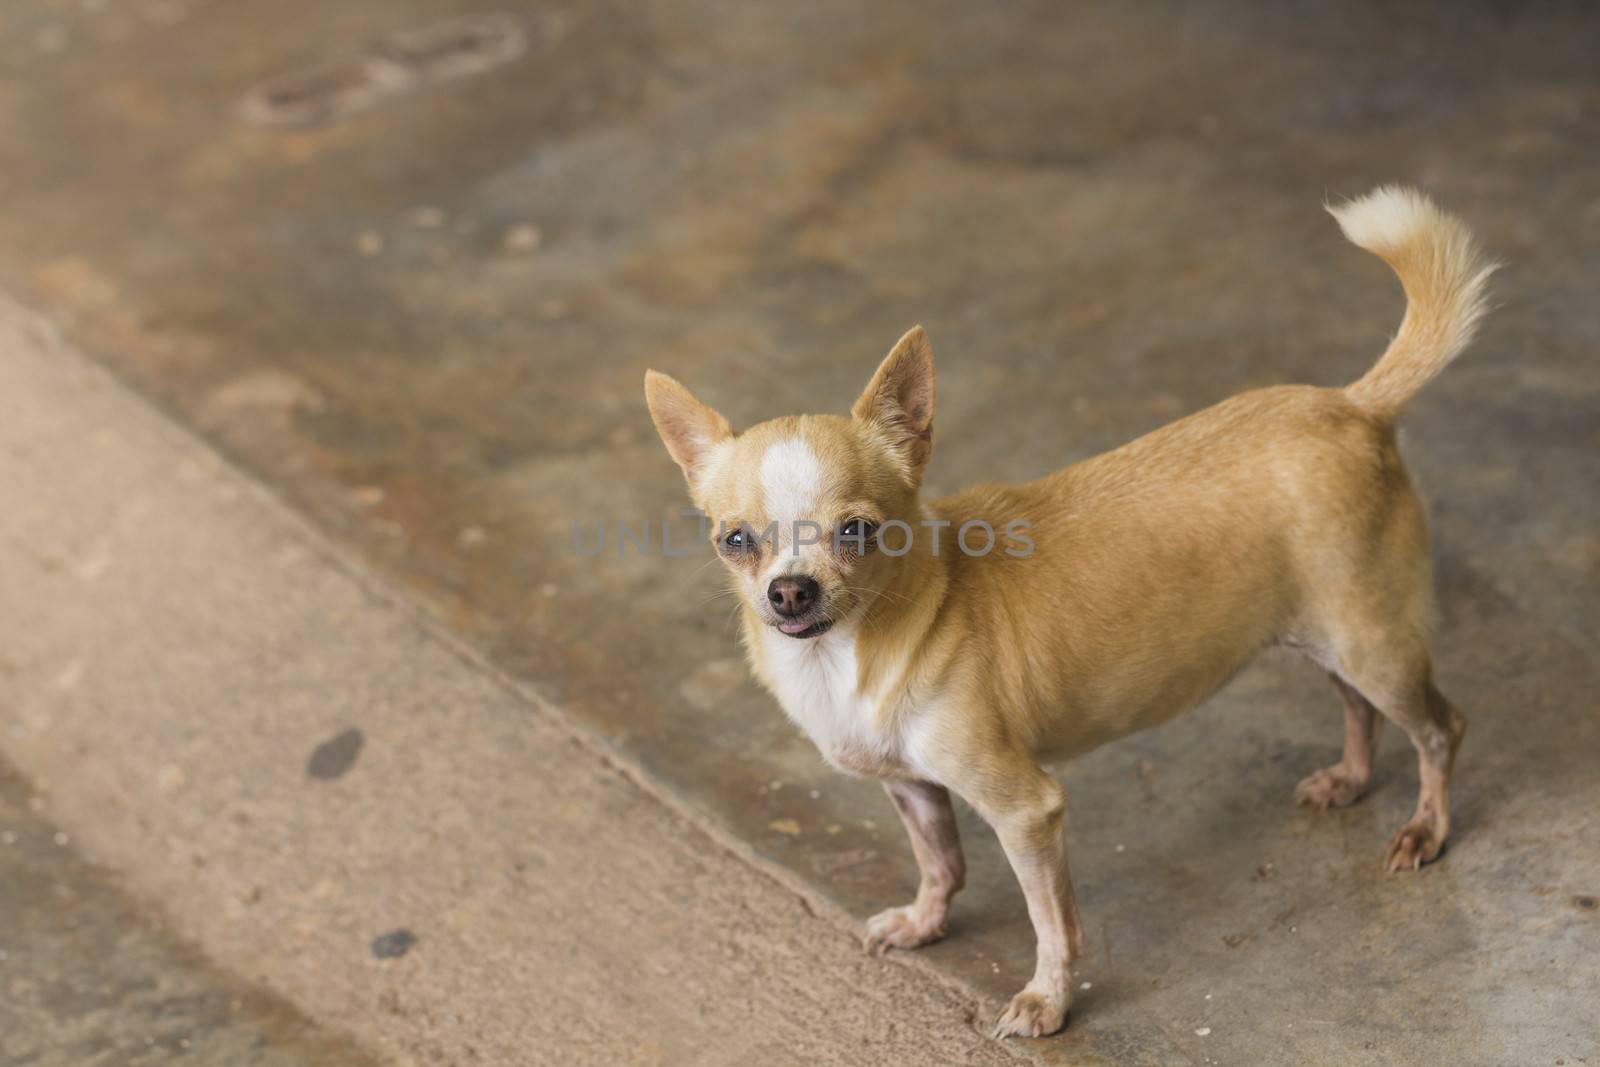 Female short haired chihuahua dog standing